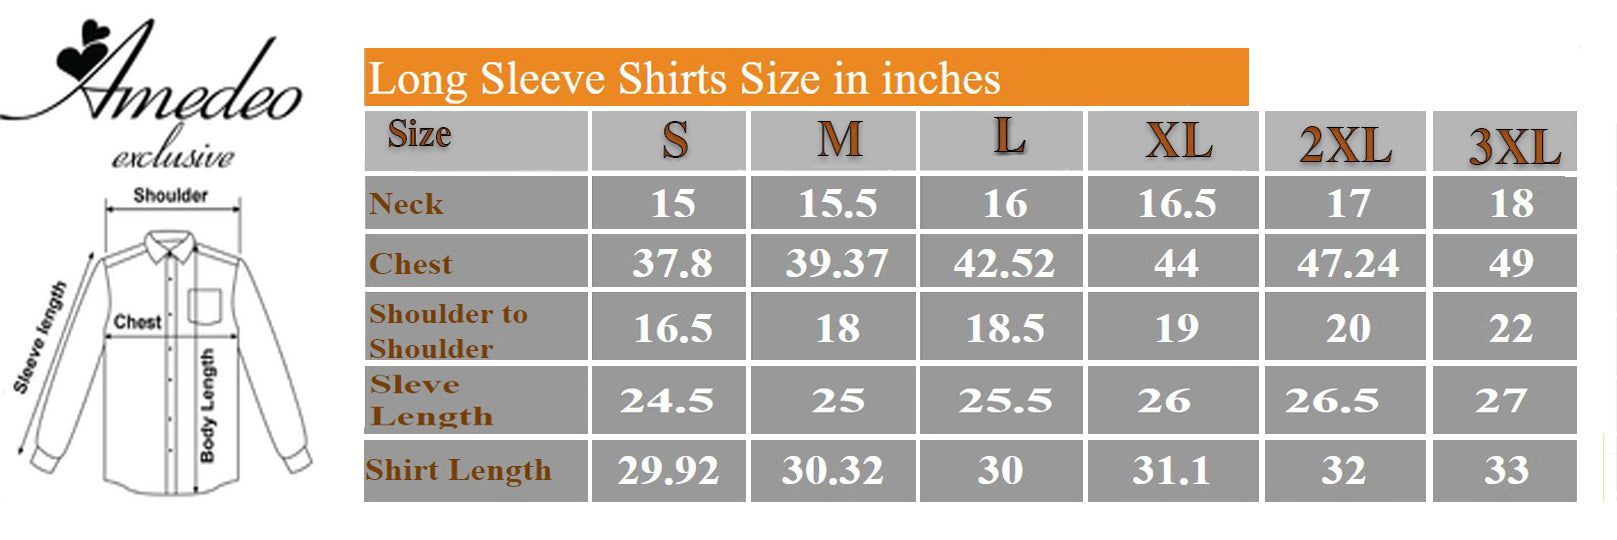 Solid Soft Grey Mens Slim Fit Designer Dress Shirt - tailored Cotton Shirts for Work and Casual Wear - Amedeo Exclusive